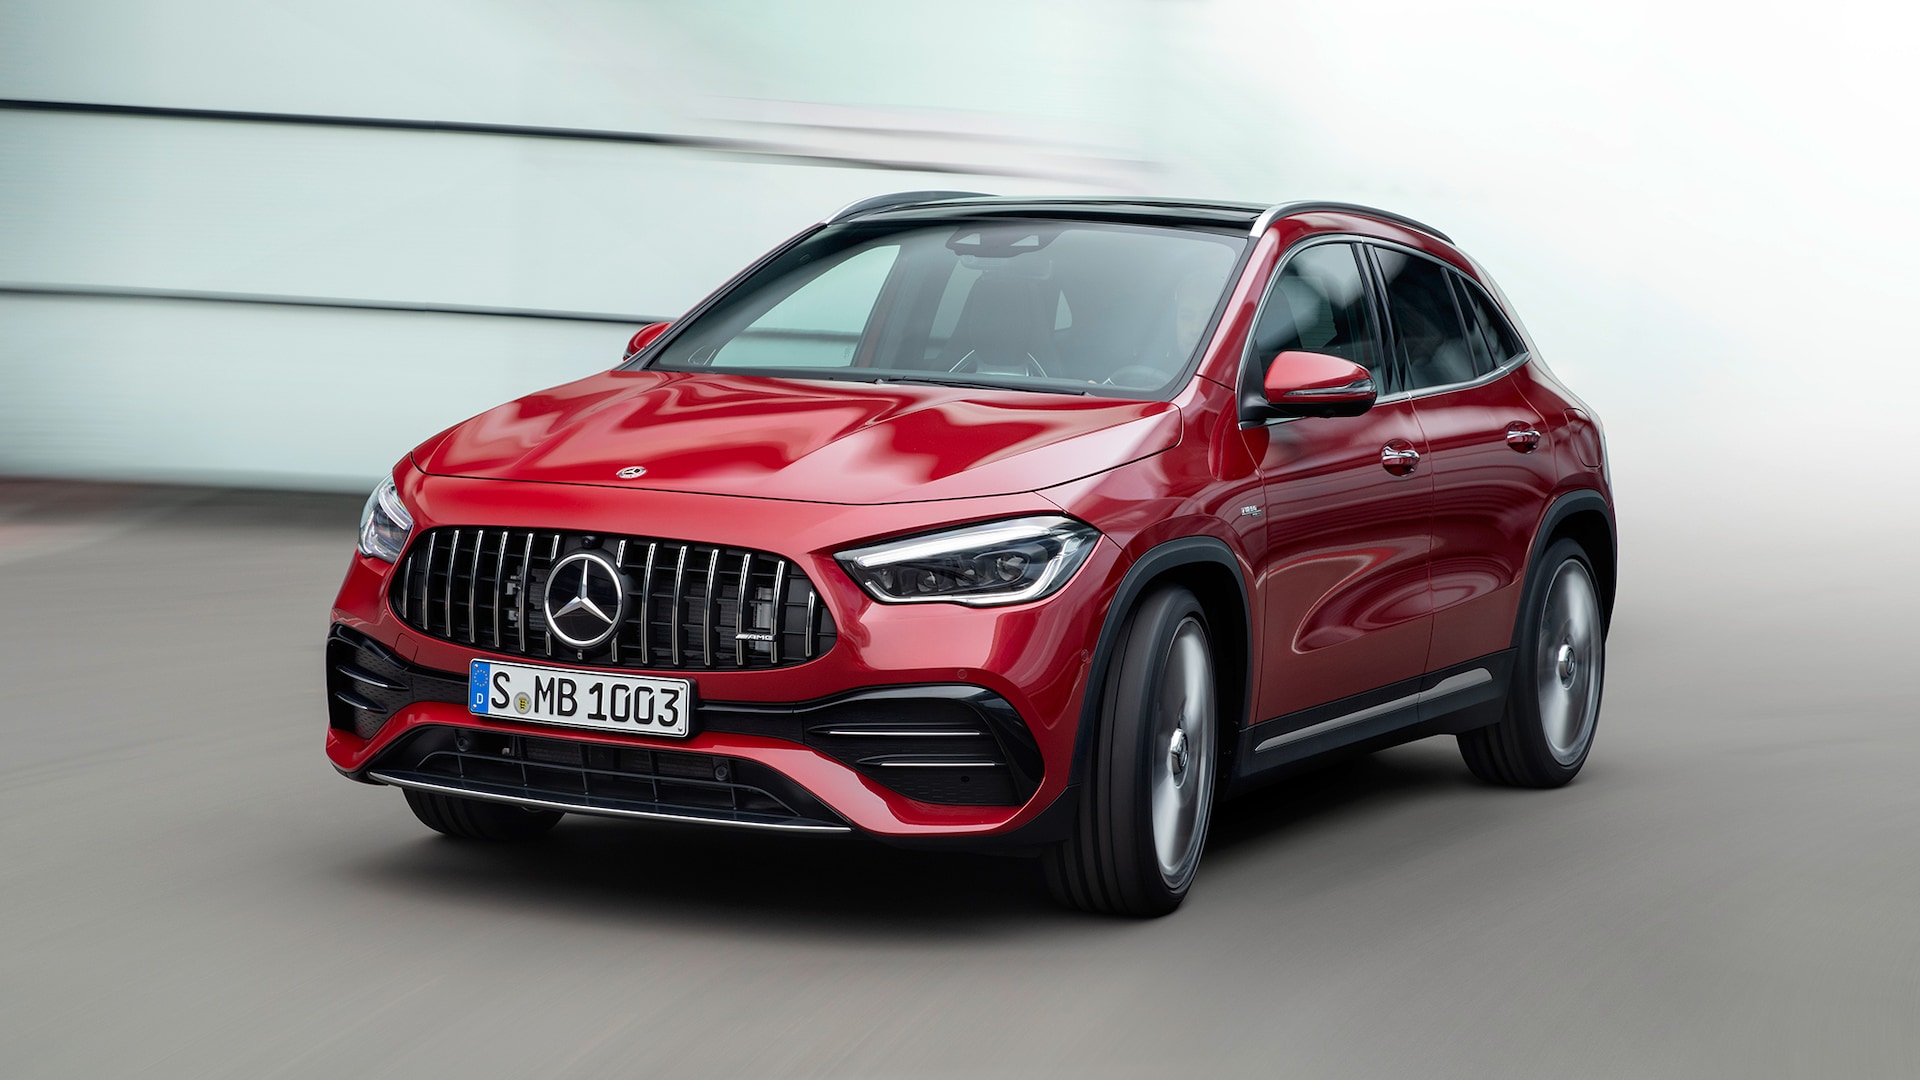 2021 Mercedes-AMG GLA 35 First Drive Review: AMG All the Things?